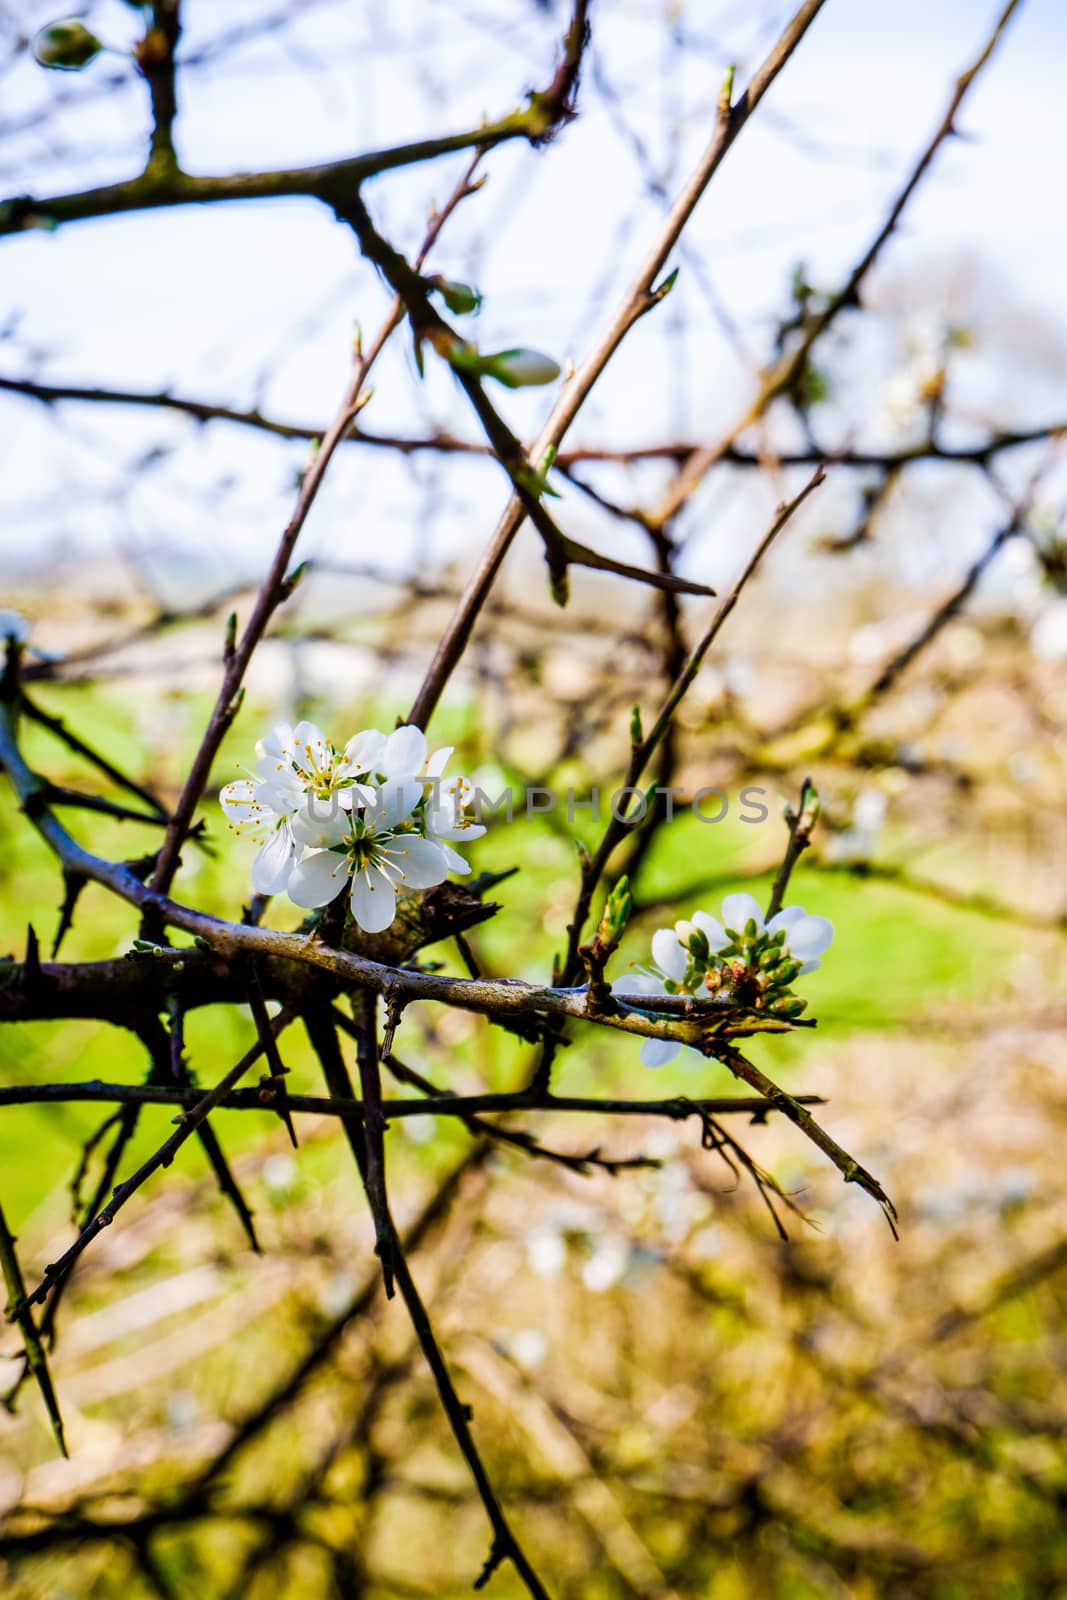 Blackthorn blossom close up with fields behind by paddythegolfer